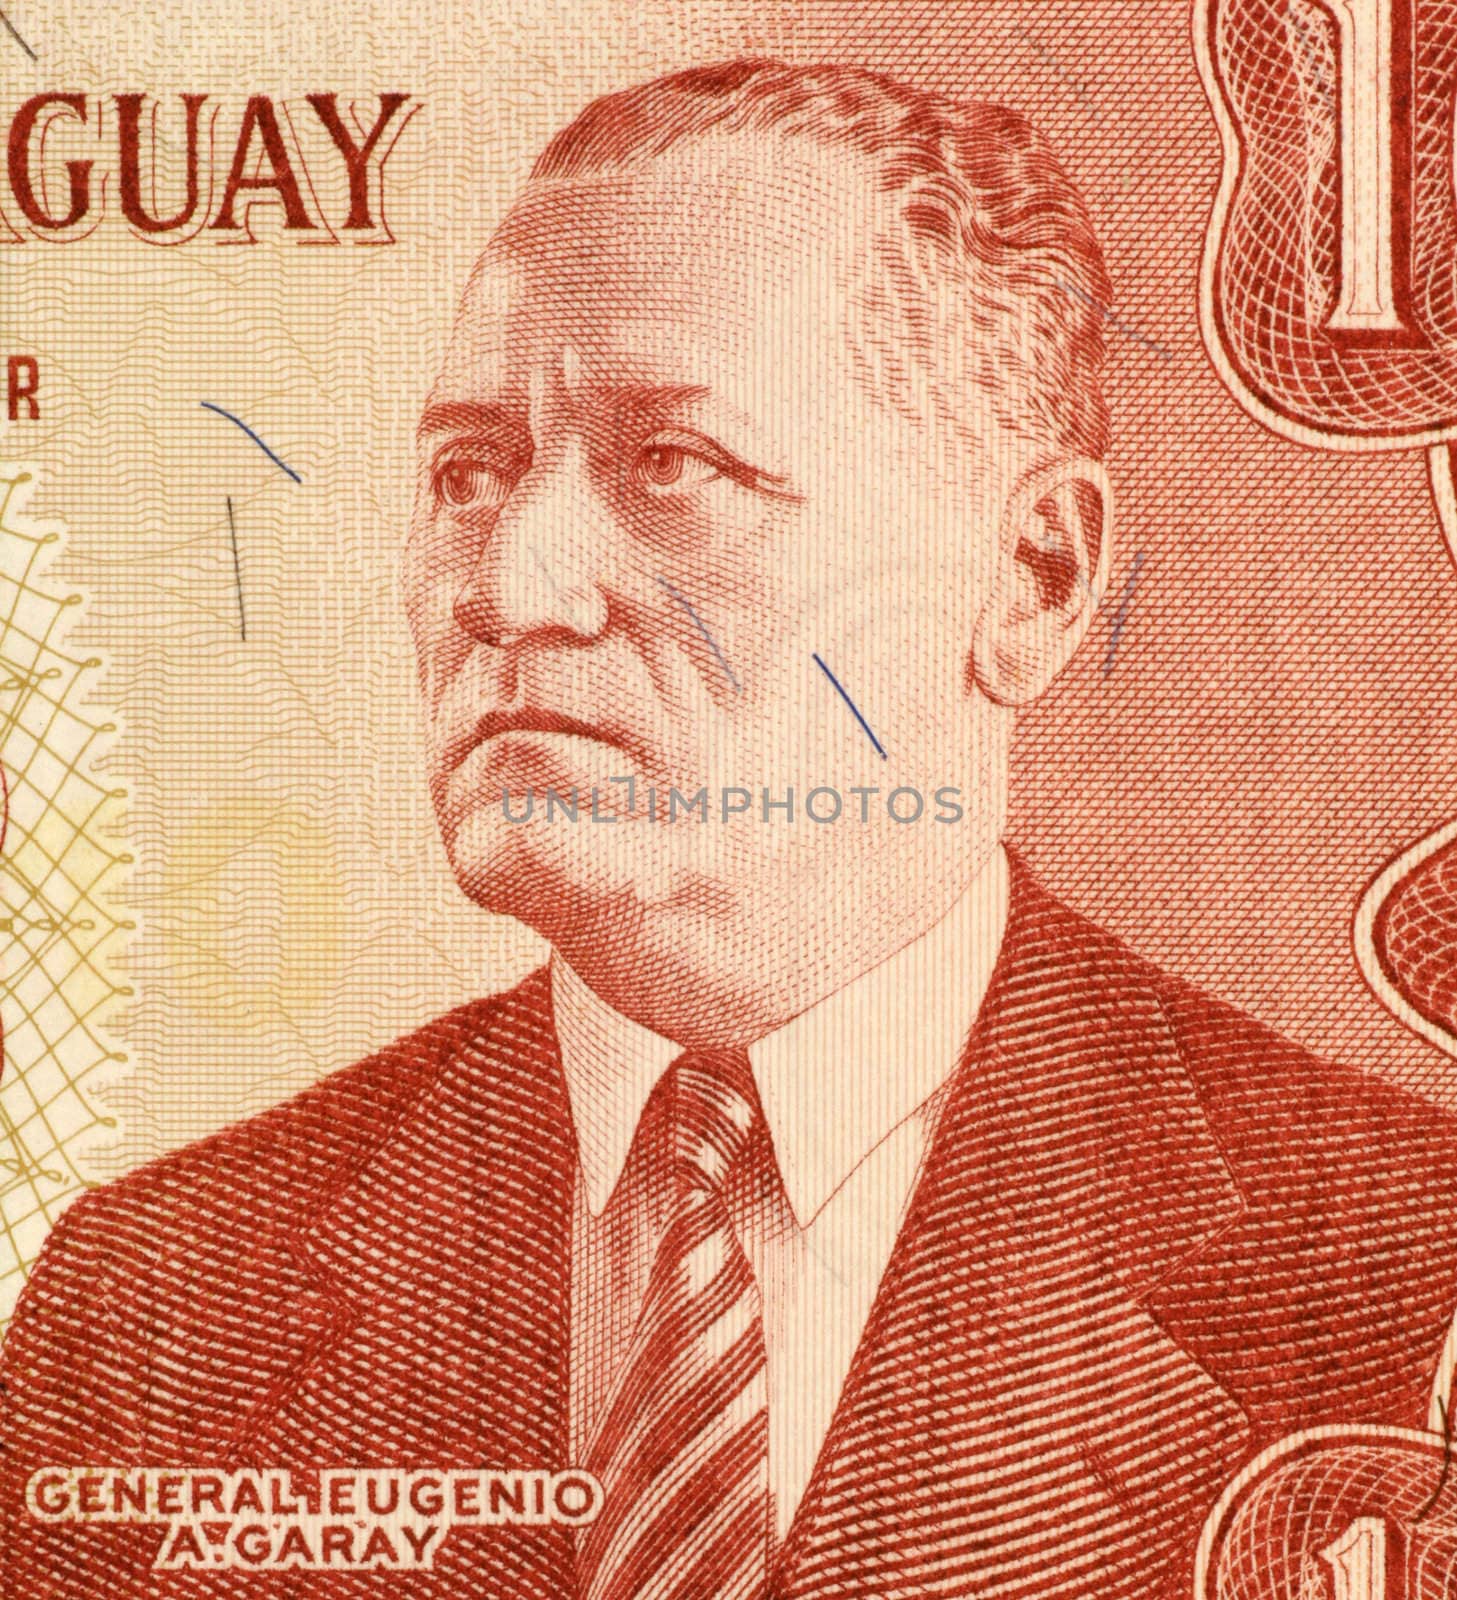 General Eugenio A. Garay on 10 Guarani 1963 Banknote from Paraguay.